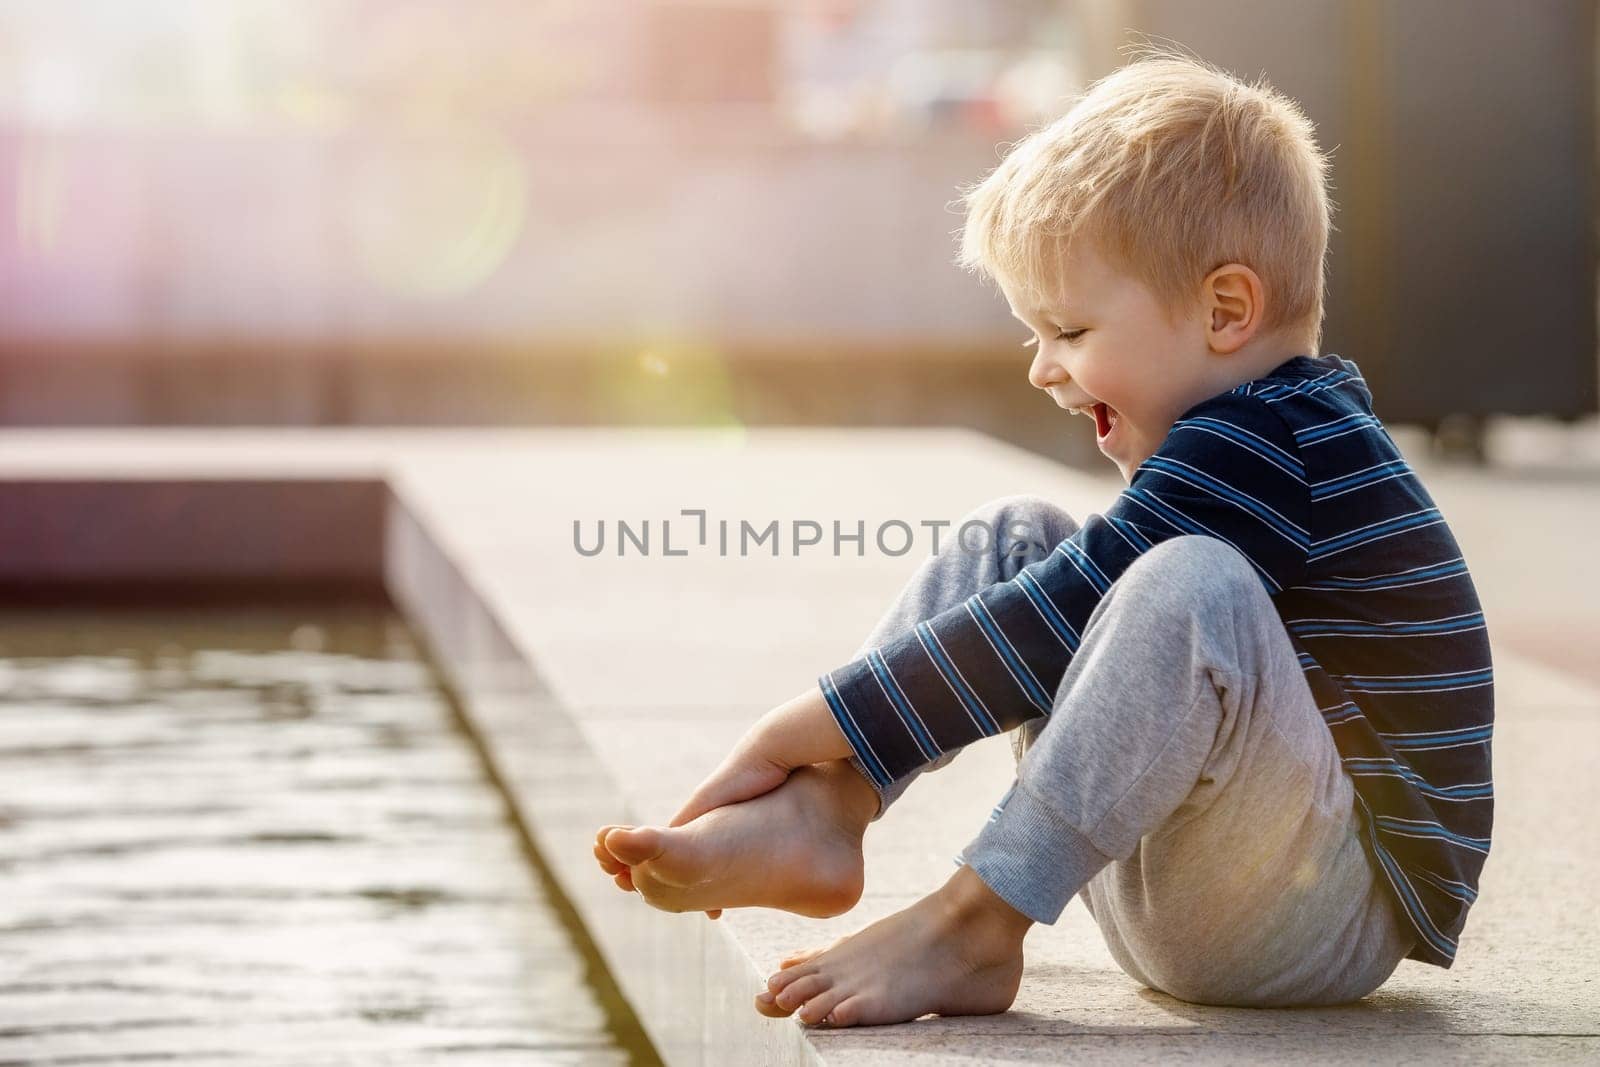 Boy having fun in water fountains. Child playing with a city fountain on hot summer day. Happy kid having fun in fountain. Summer weather. The child is surprised by the low water temperature.